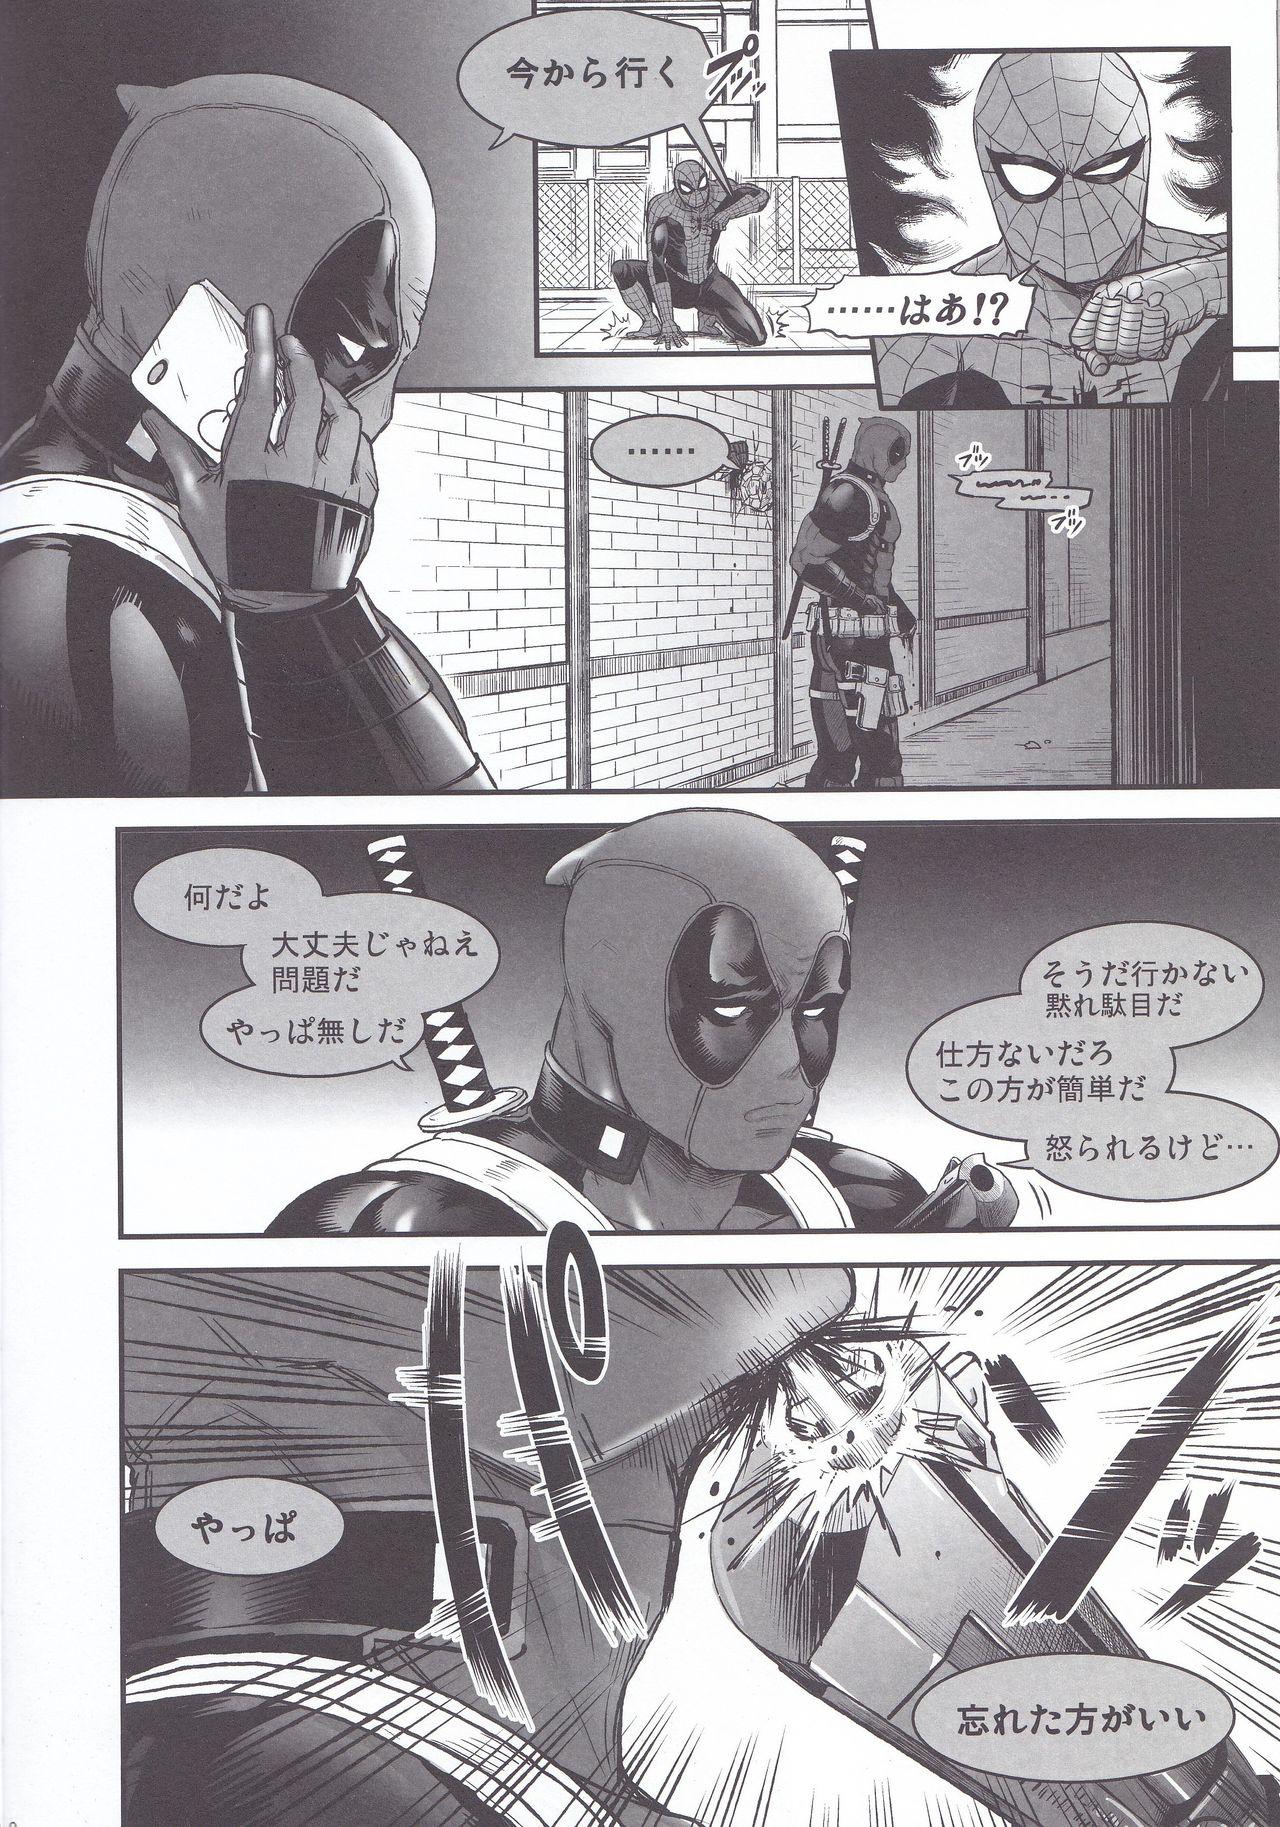 Bj Hollow - Spider-man Deadpool Orgy - Page 8